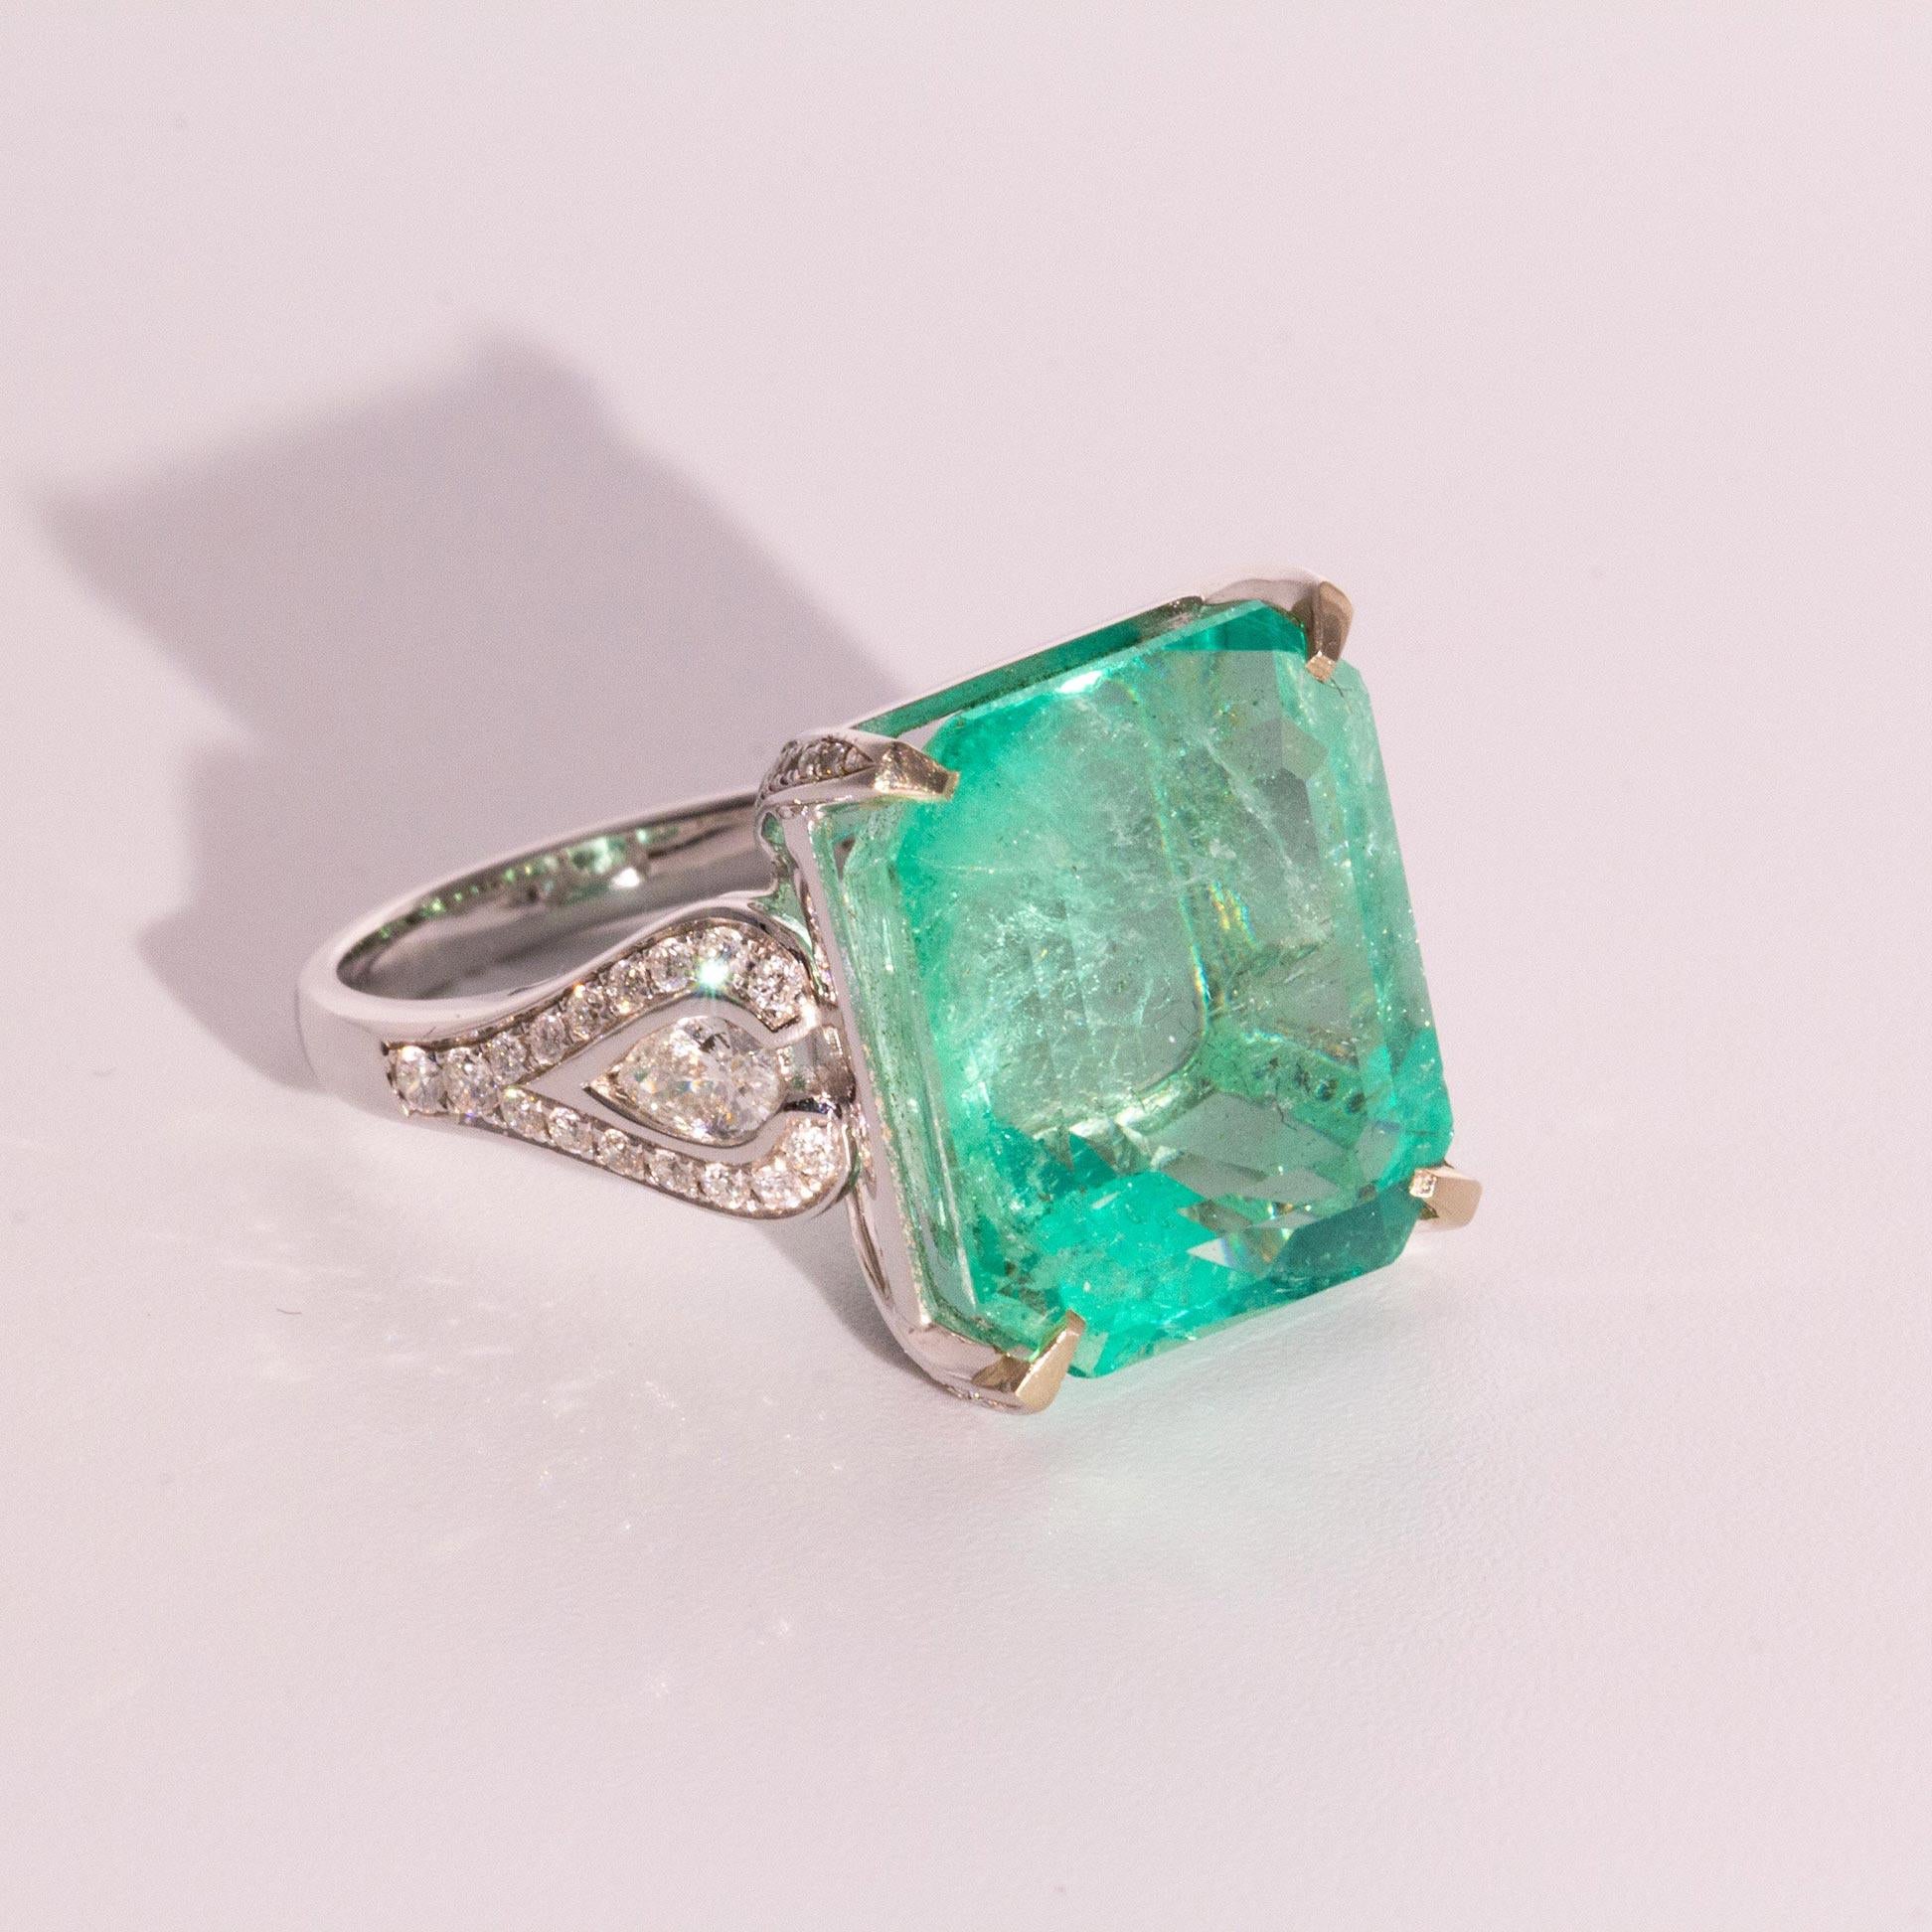 This 18.09 Carat Emerald and Diamond 18 Carat White Gold Ring is certainly a showstopper! Imagine yourself wearing this breathtaking emerald ring to the amazement of others. 

Featuring an emerald of 'moderate' treatment flanked by pear cut diamonds